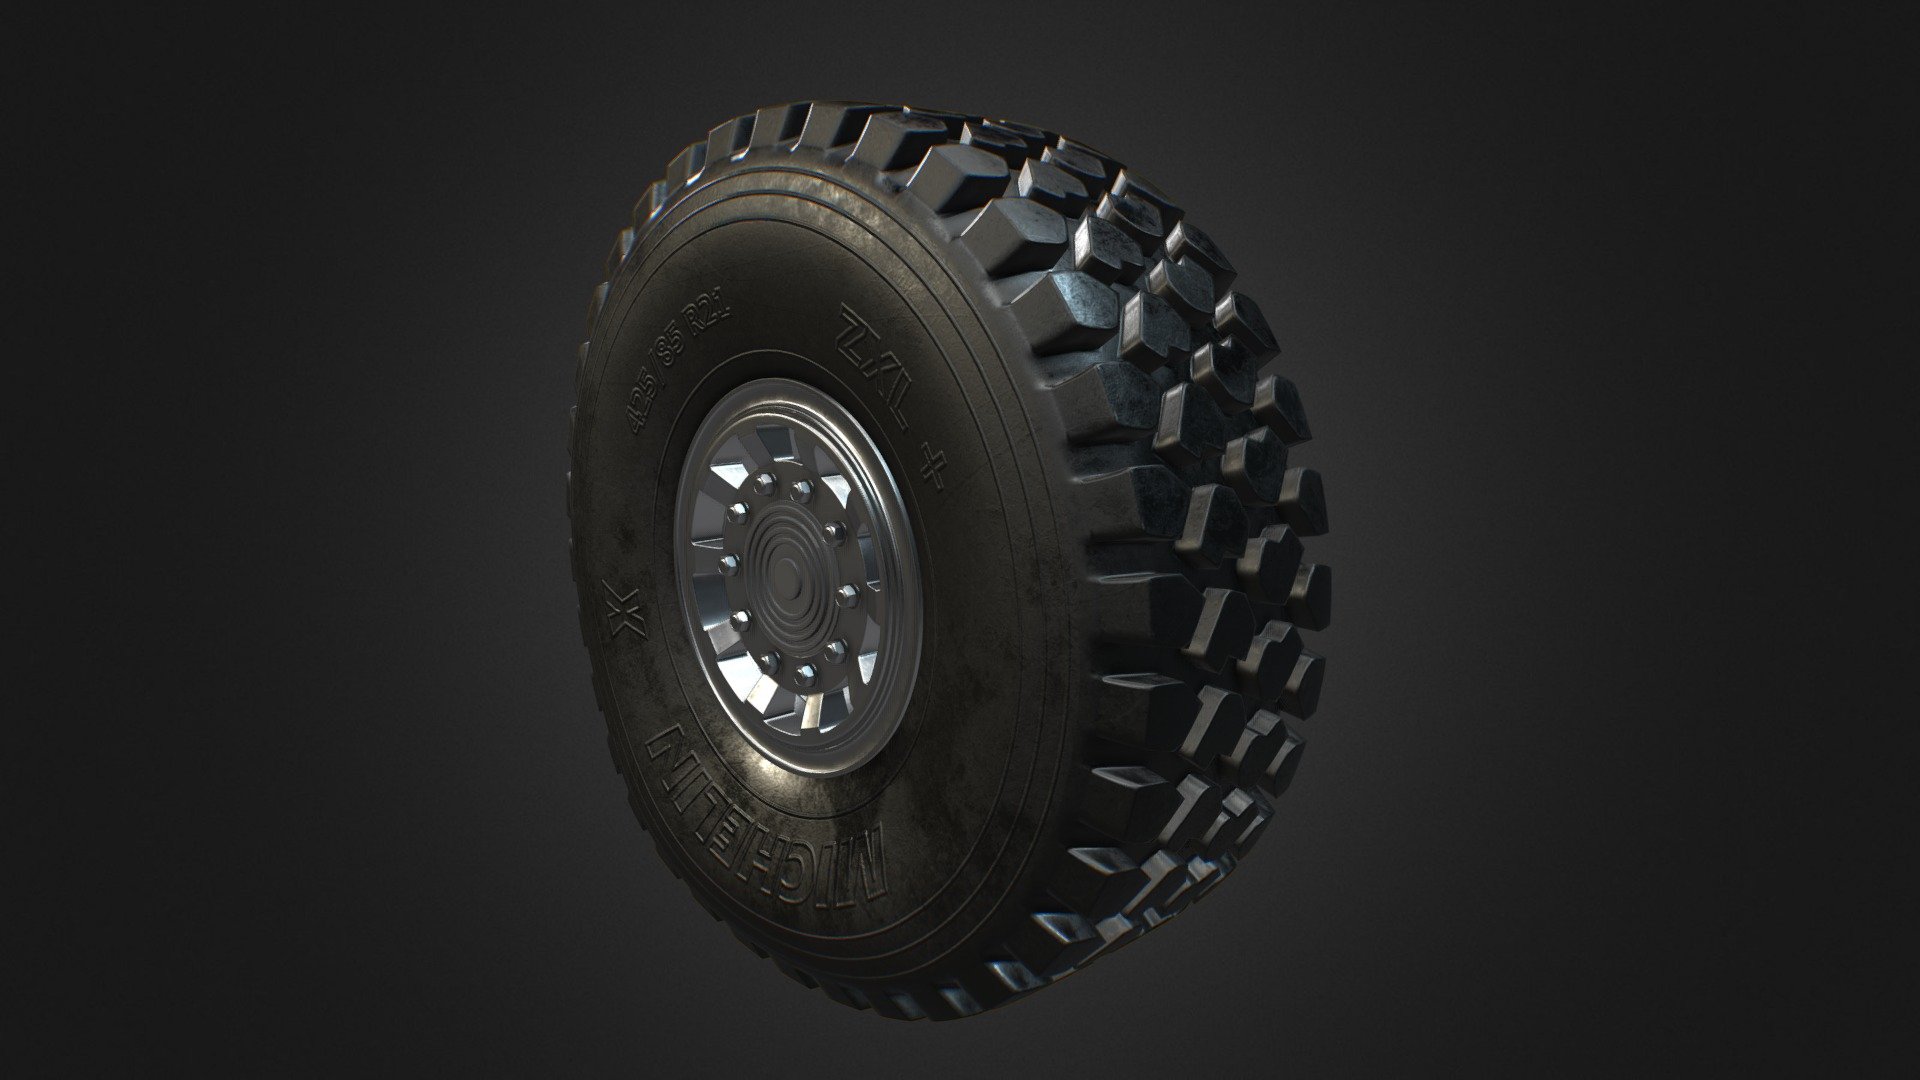 MICHELIN X OFFROAD TYRE 3d model

Dakar trucks (like Kamaz team etc.) and special military trucks (like Falcatus) use this tire.

MICHELIN X OFFROAD TIRE 3d model is a high quality and photo-real model. It has a fully textured, detailed design that allows for close-up renders so it will enhance detail and realism to your projects.

WHAT DO YOU GET:
- Two types of a wheel model: loaded rubber  (pressured) and unloaded rubber (not pressured)
- 4 different PBR shaders (metallic/roughness) of a clean rubber for every wheel (4x color maps, 4x metallic maps, 4x roughness maps, 4x normal maps, 4x height maps) which you can use in every contemporary renderers and game engines.

SPECIFICATIONS

Tire: 26,112 polygons
Disc: 11,500 polygons
Screws: 2,010 polygons
Cap: 1,679 polygons

All textures have a 4k resolution (4096x4096 pixels)

All parts of the model have a UV mapping and Non-overlapping unwrapped UVs 

Hope you like it and happy rendering! - MICHELIN X OFFROAD TIRE CLEAN - 3D model by Arseny Lavrukhin (@alav) 3d model